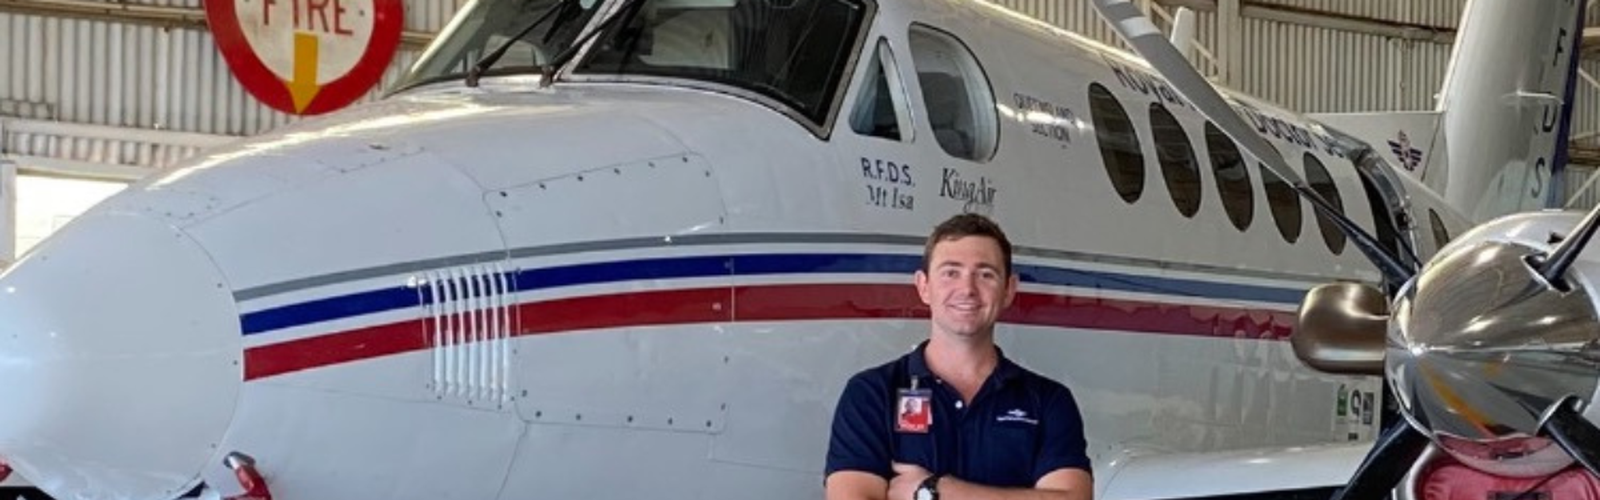 Brady in front of aircraft